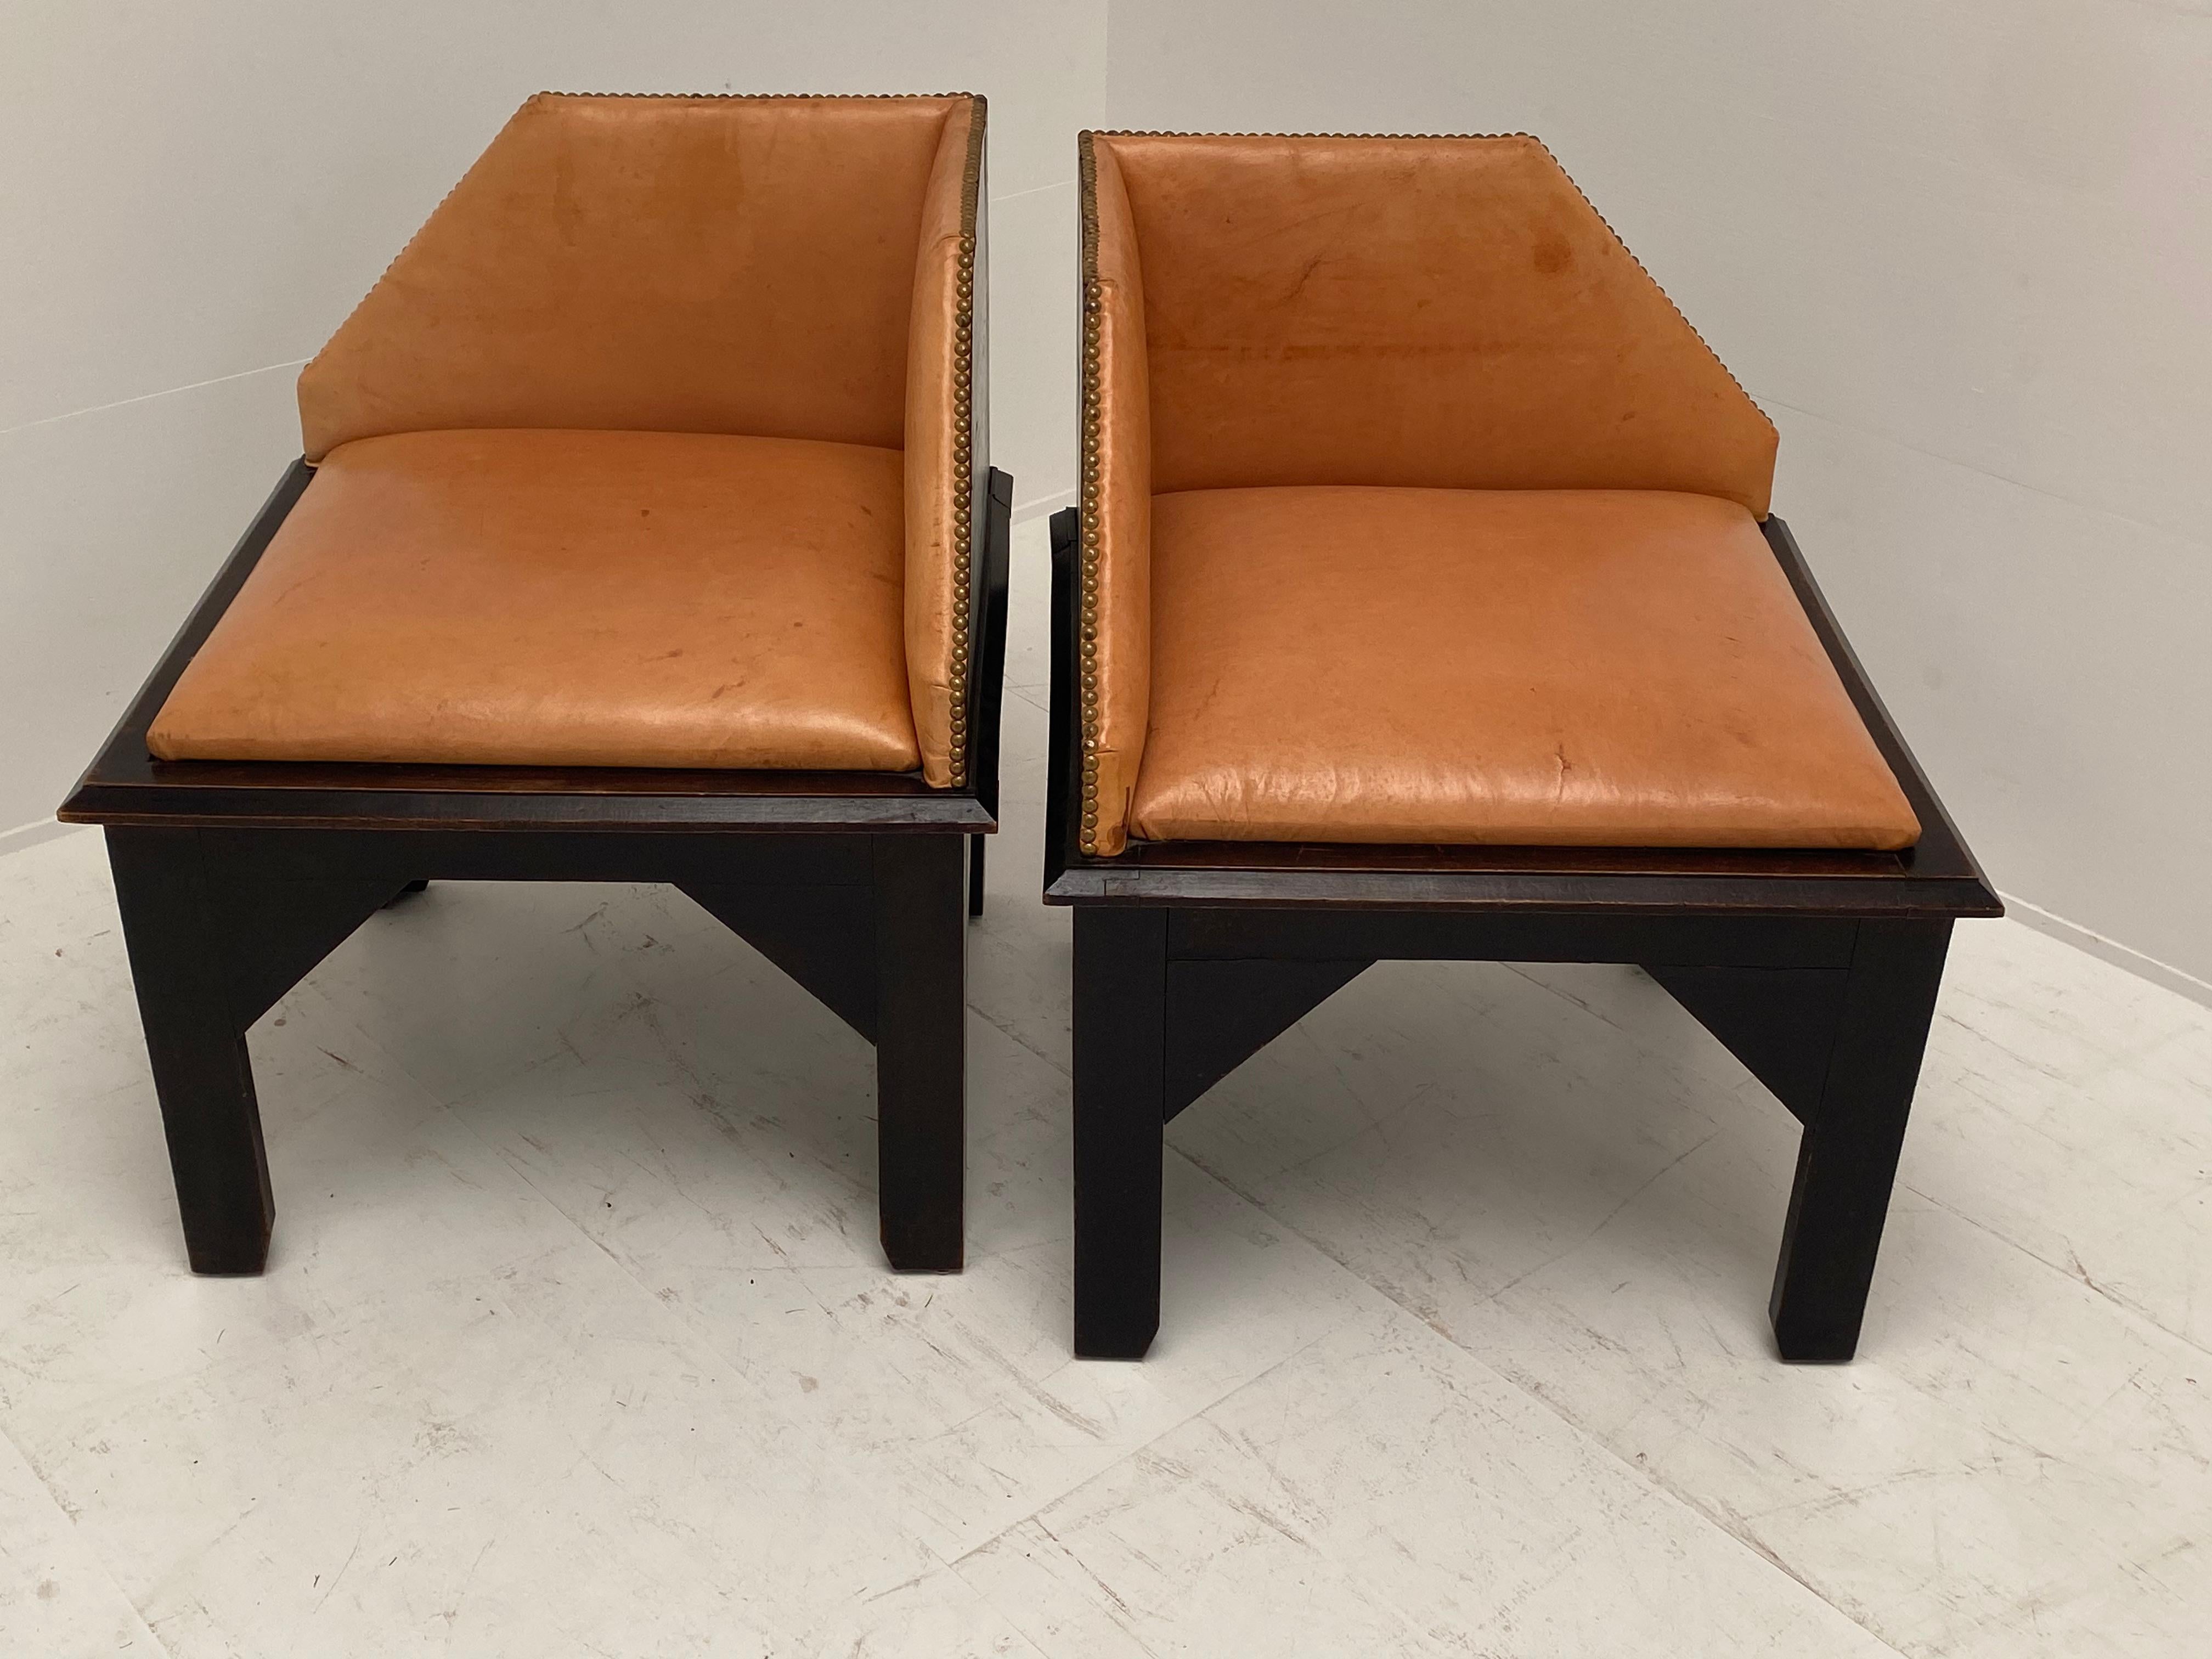 Pair of Art Deco Style Leather Corner Chairs, Spain 1